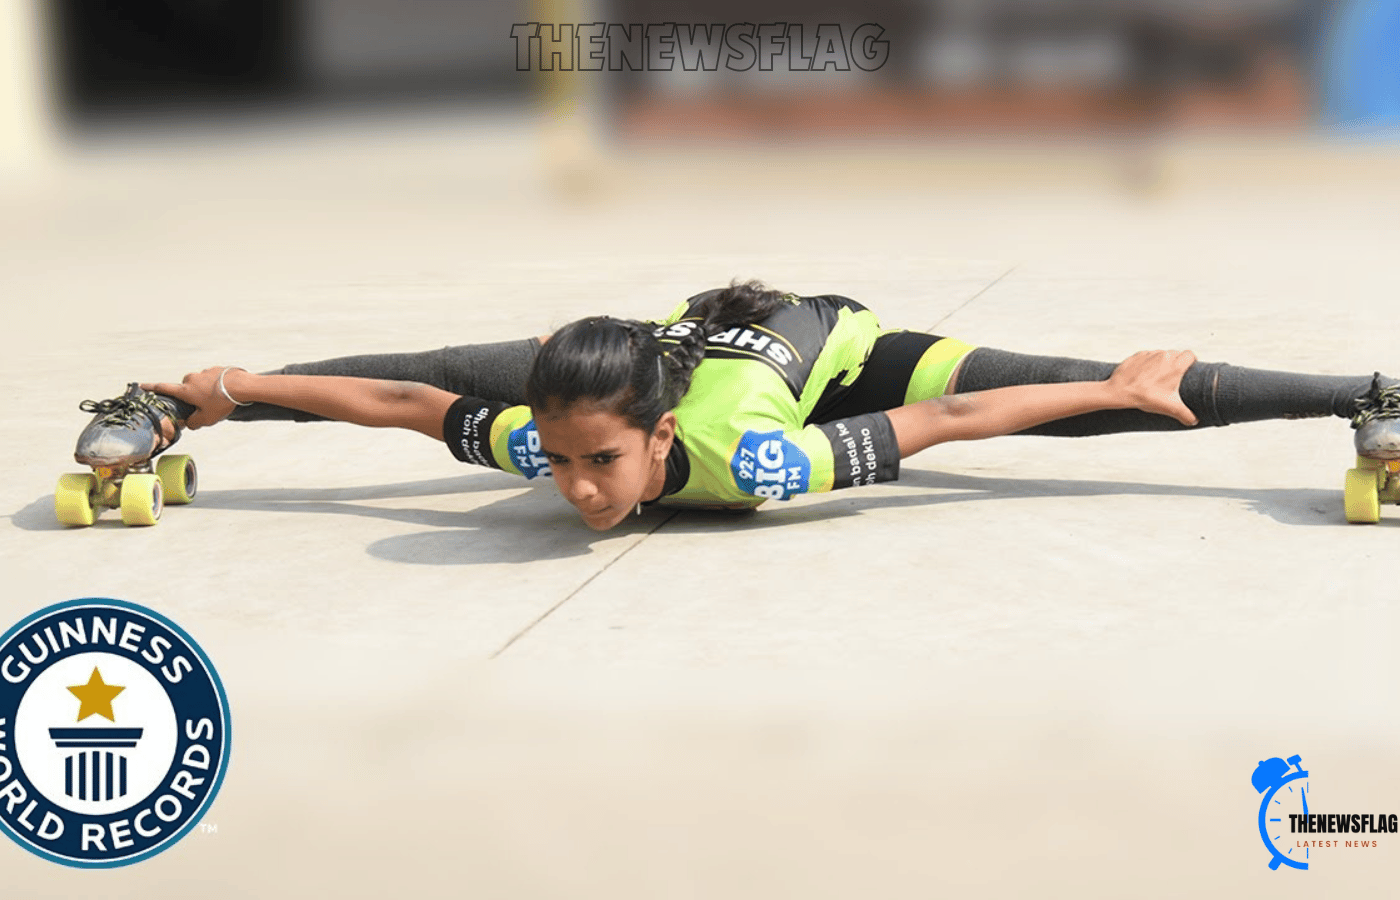 A 7-year-old Tamil Nadu girl breaks the world record for skating